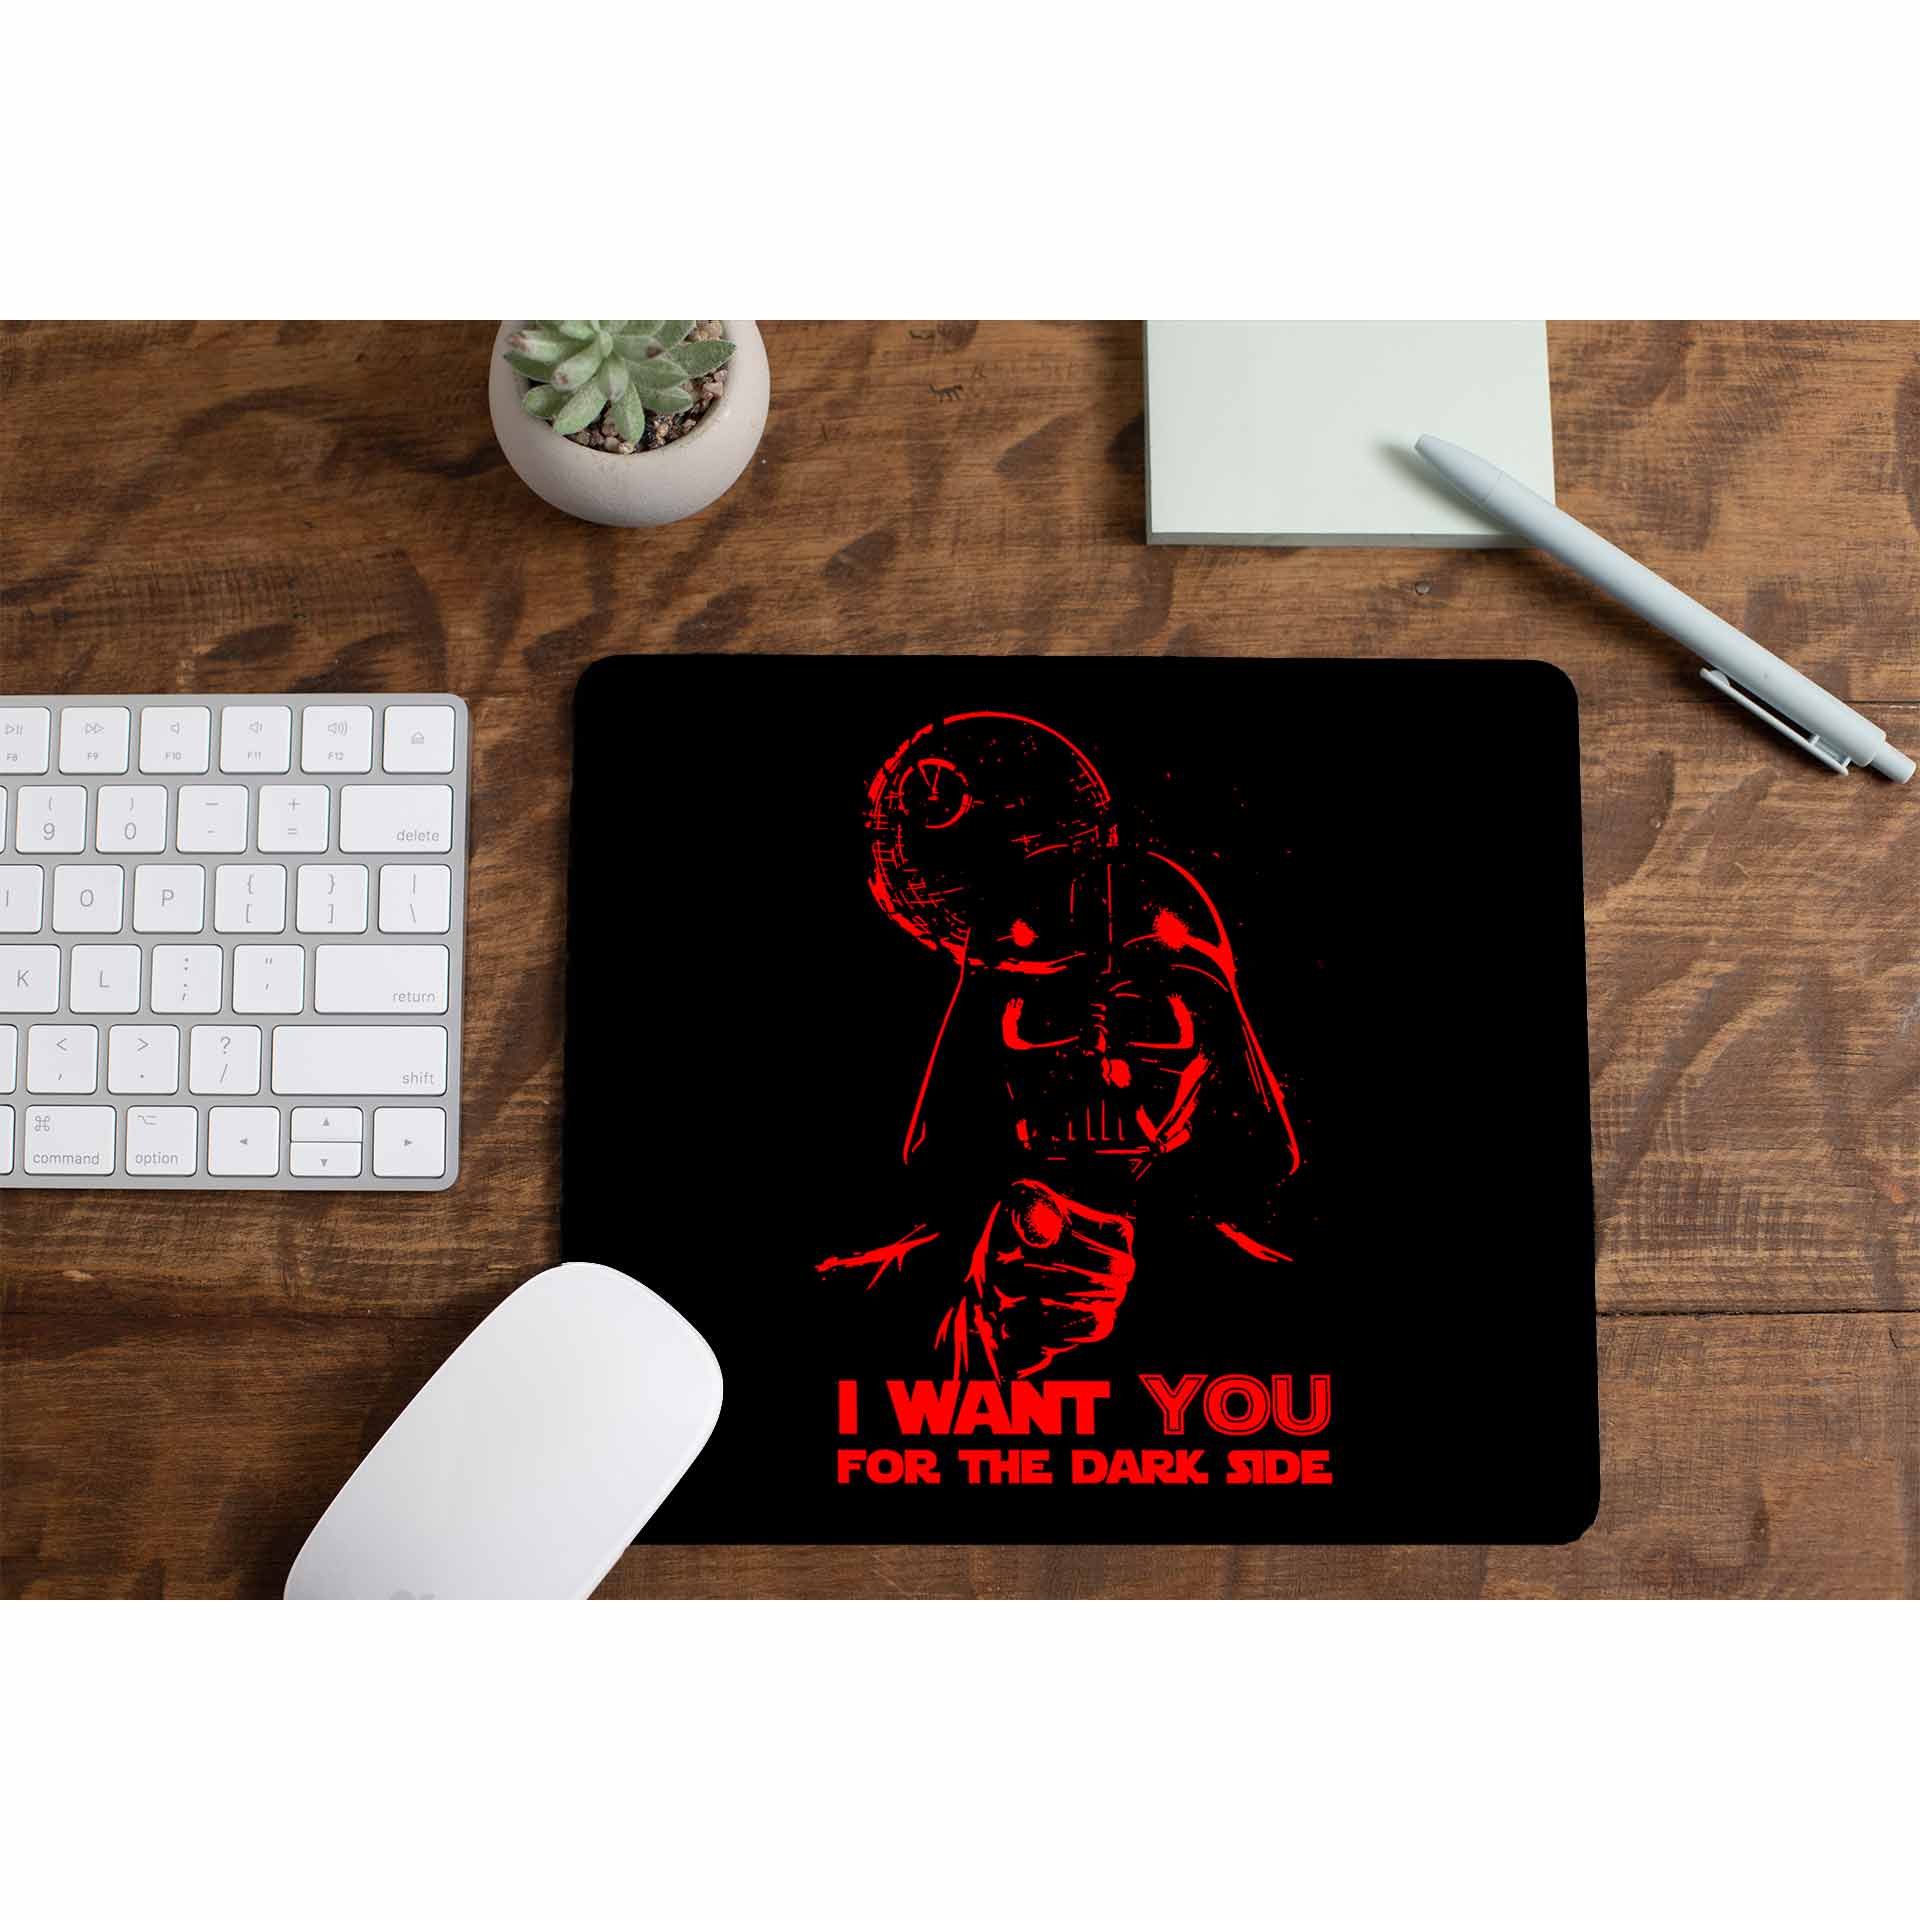 star wars i want you for the dark side mousepad logitech large anime tv & movies buy online india the banyan tee tbt men women girls boys unisex  darth vader